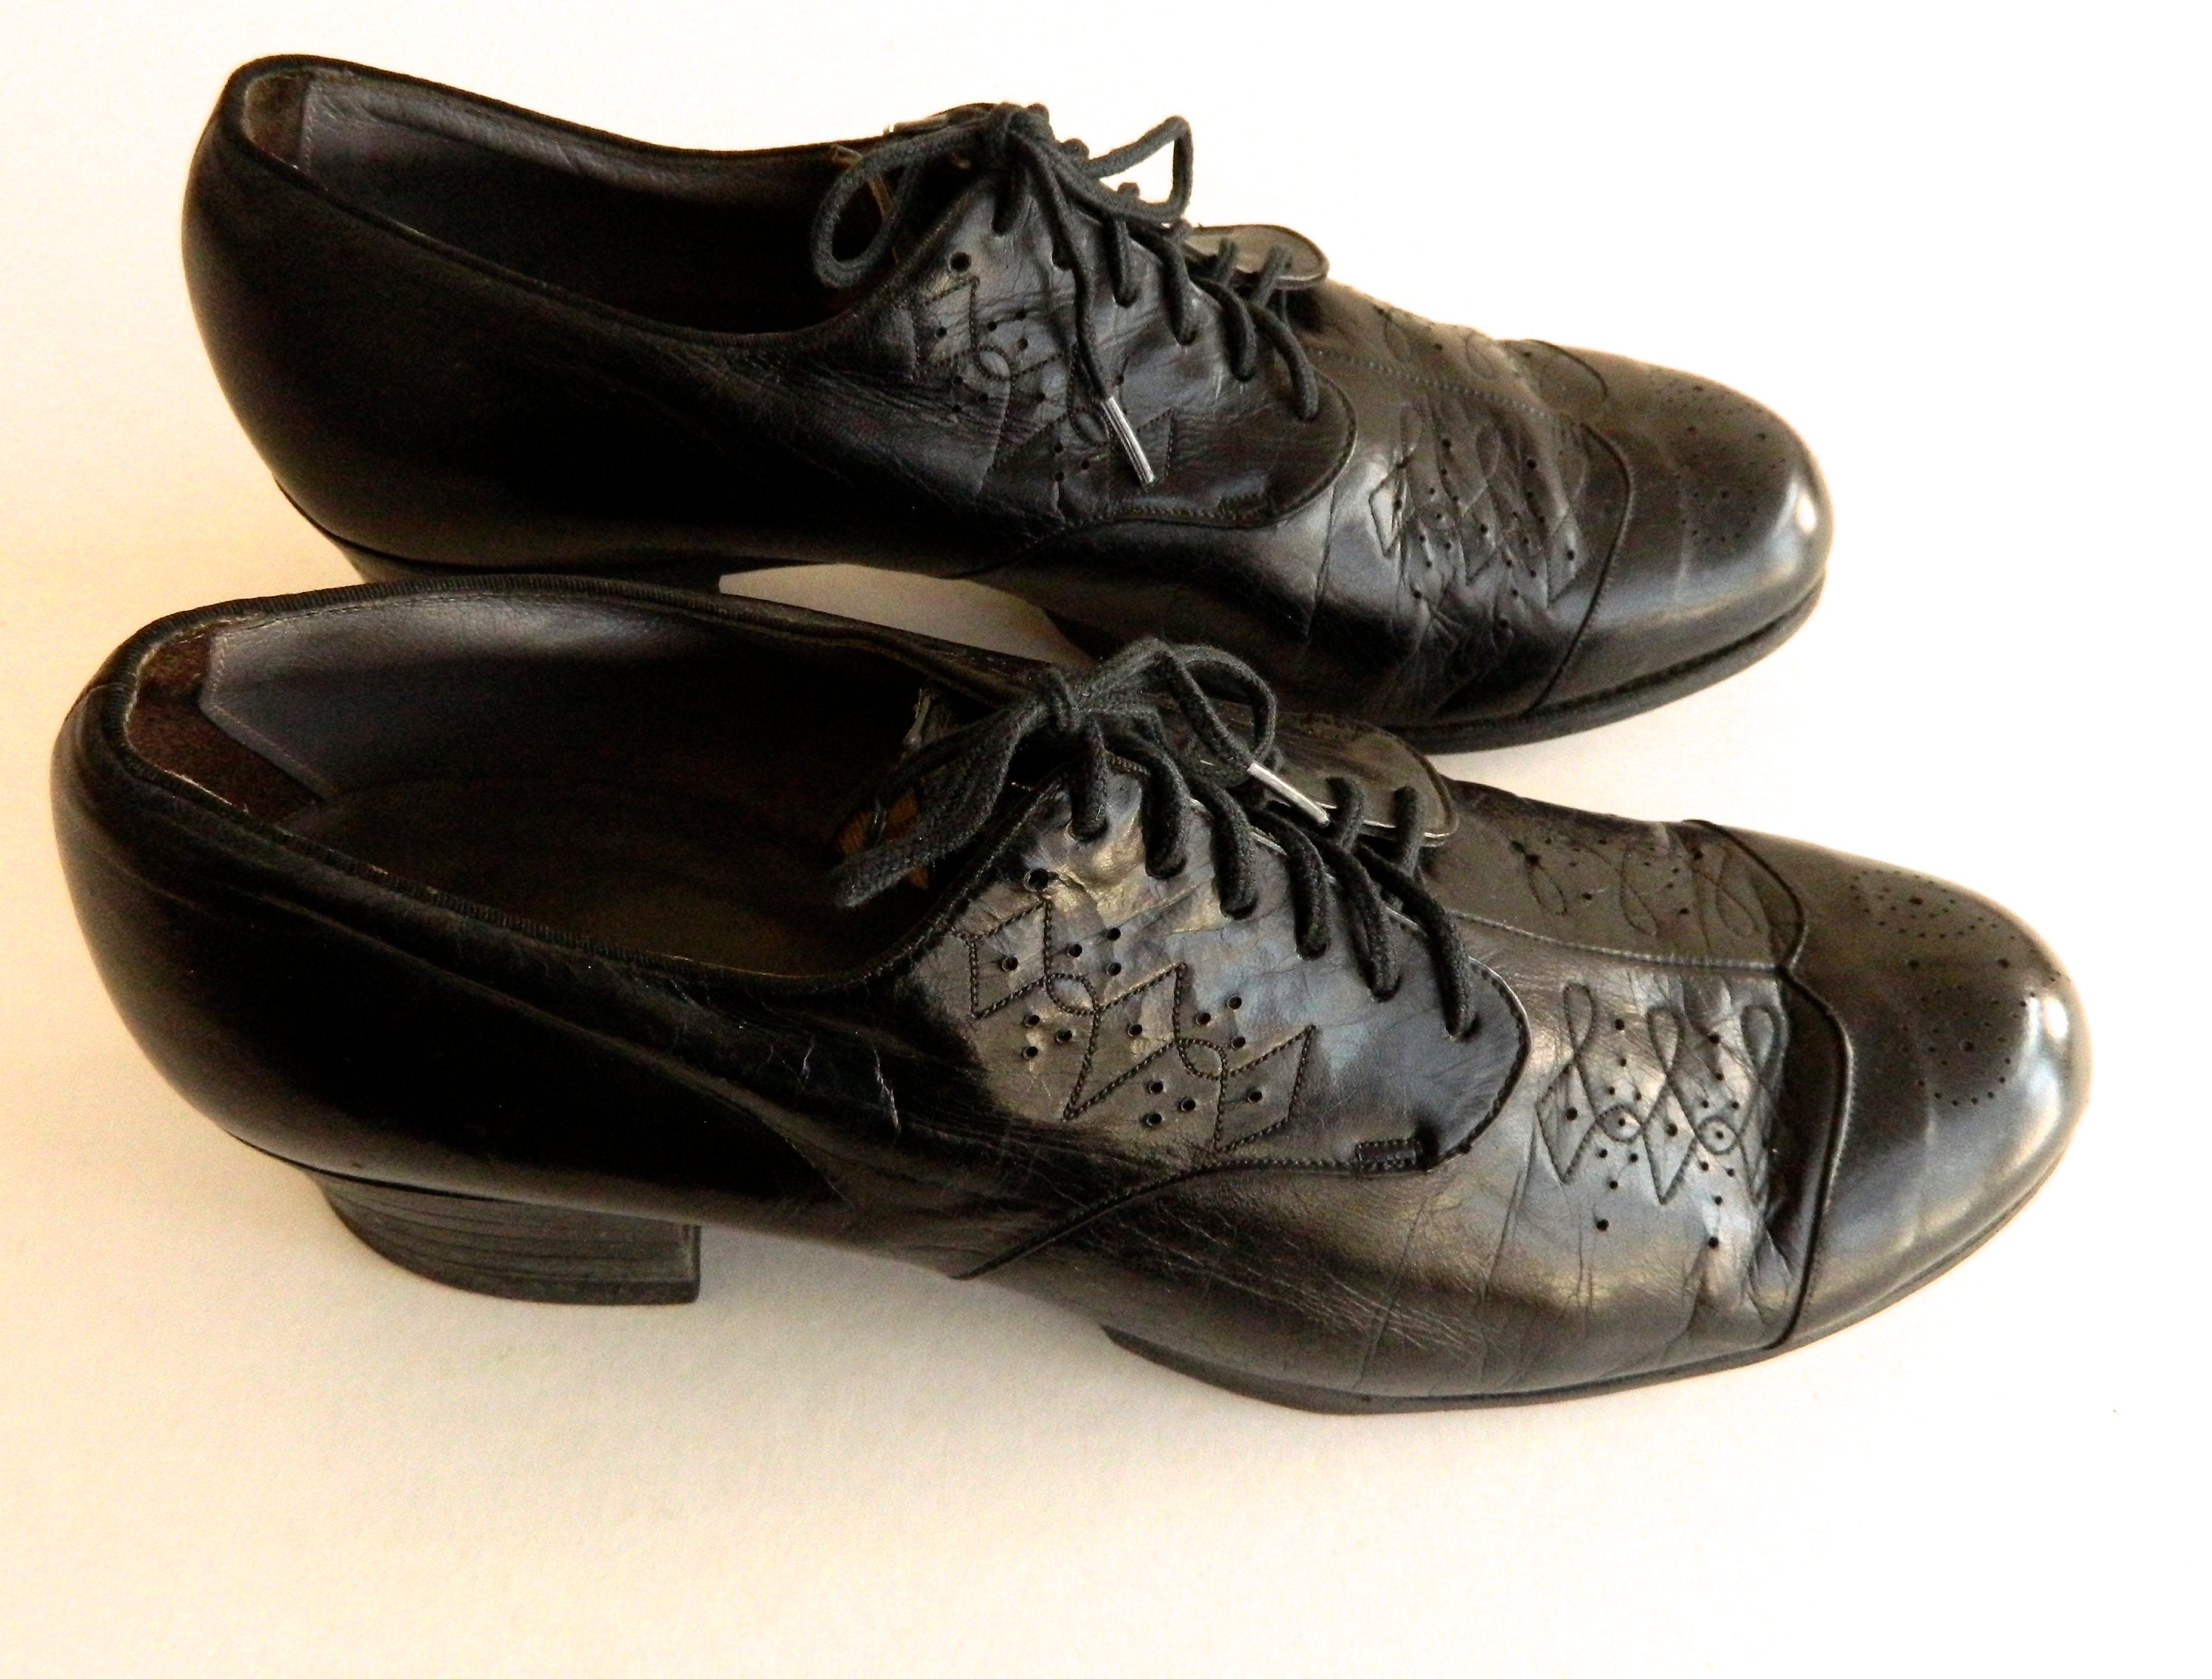 Vintage 1930s Wilbur Coon Black Leather Oxford Shoes Size 8 with 2 Heels